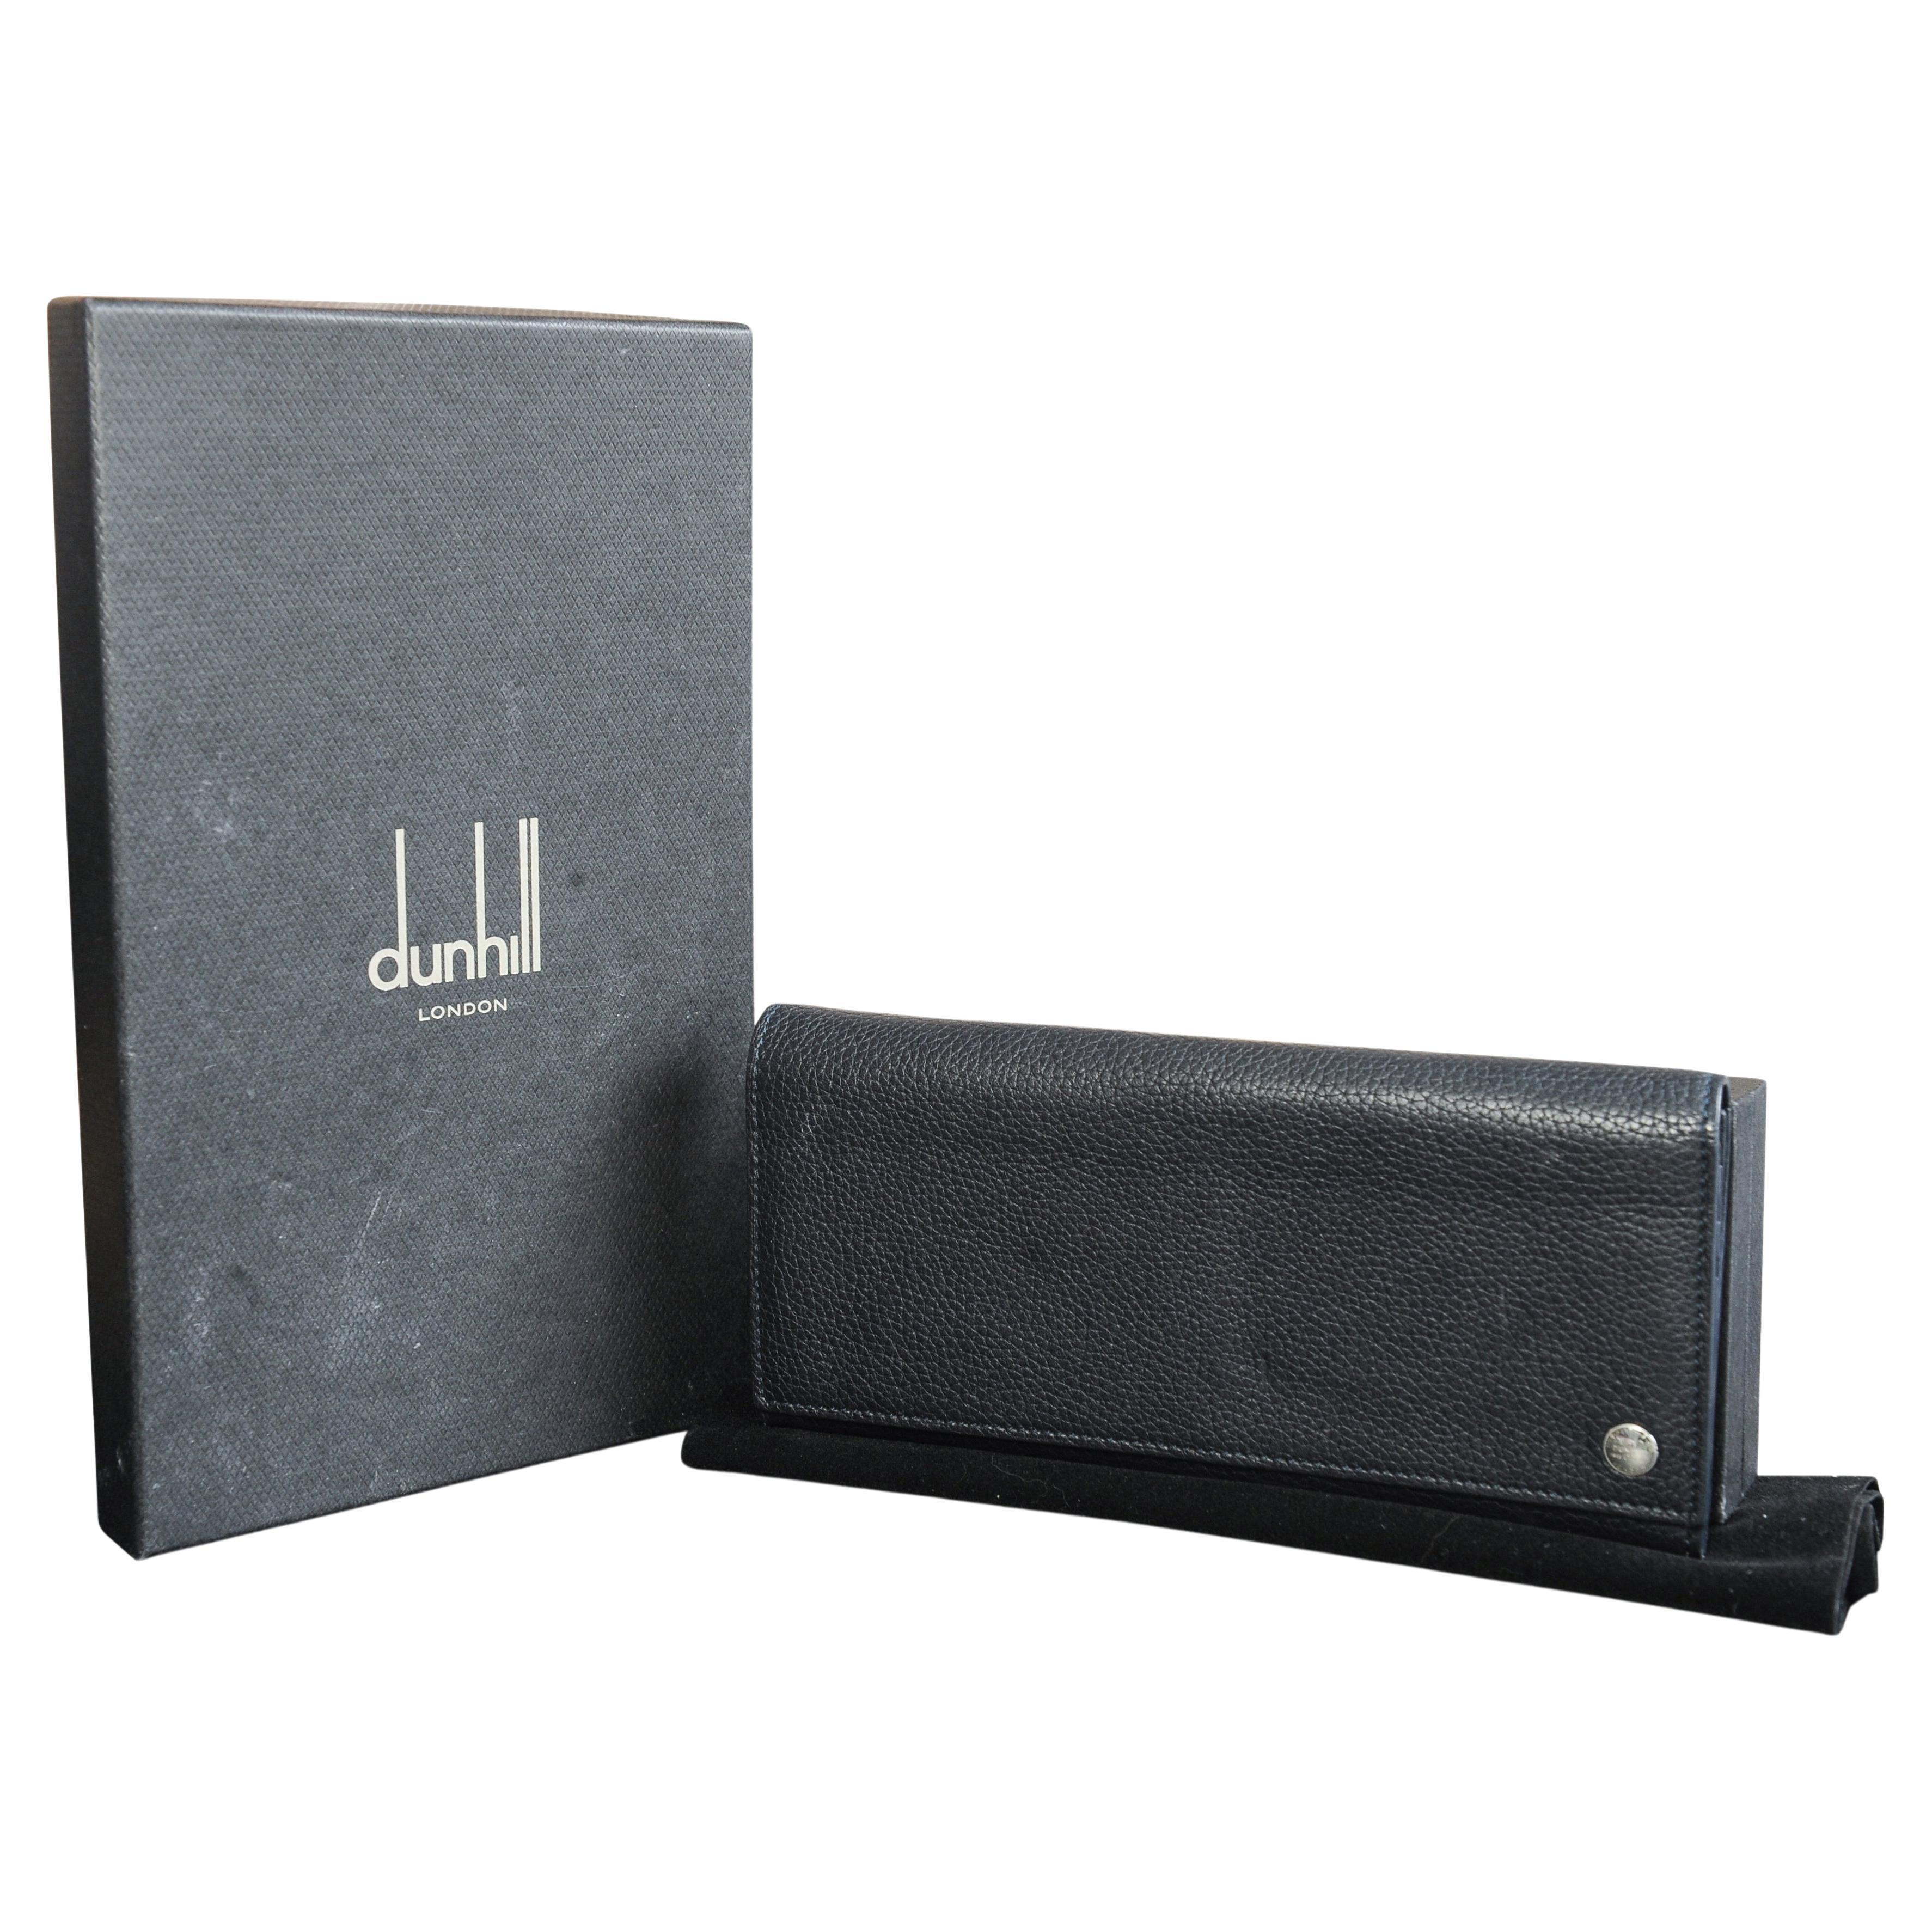 Dunhill London Branded Black Calf Leather Boxed Coat Wallet Made in Italy 

Ref: LZV31ON

Wallet size width 19.5cm I height 9.5 I depth 1.5cm

Featuring ten card slots, one zipped pocket for coins, & three cotton lined, and velvet dust